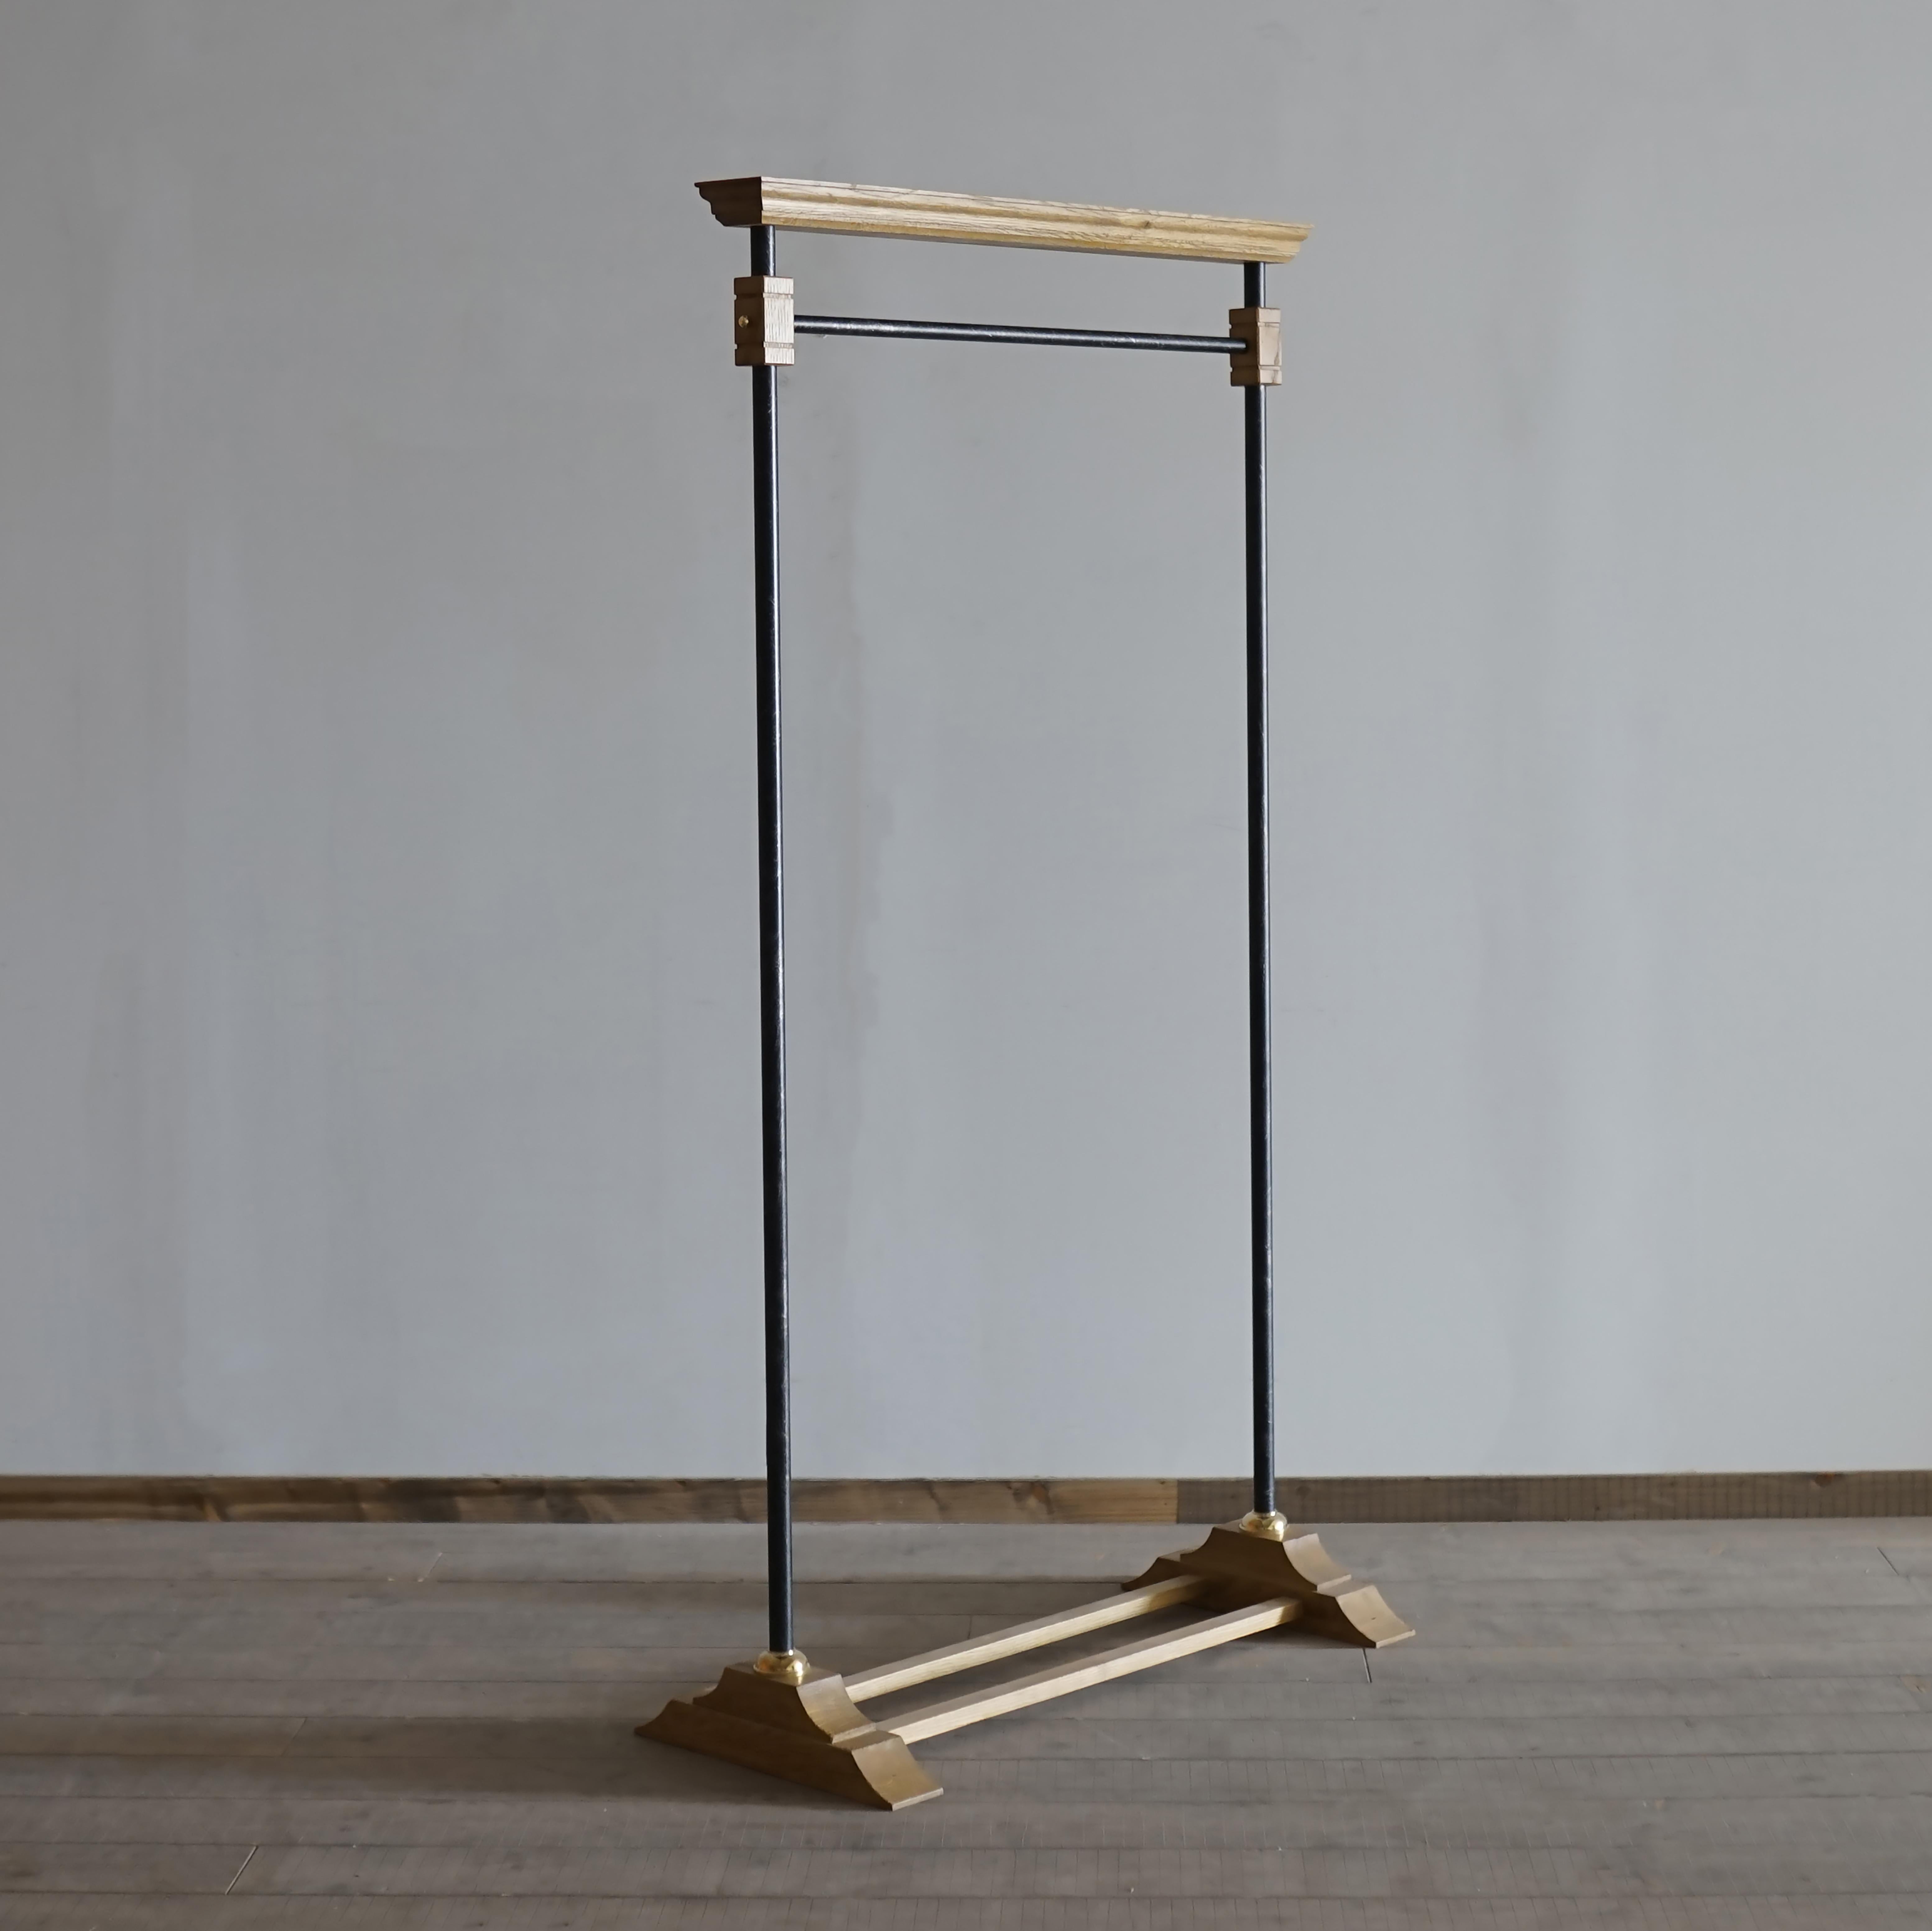 The aged iron poles give this hanger rack a tasteful yet modern design.
The wood is made of Nara, a wood with a beautiful grain. The combination of different materials makes the space stand out.
The brass fittings accentuate the piece and give it